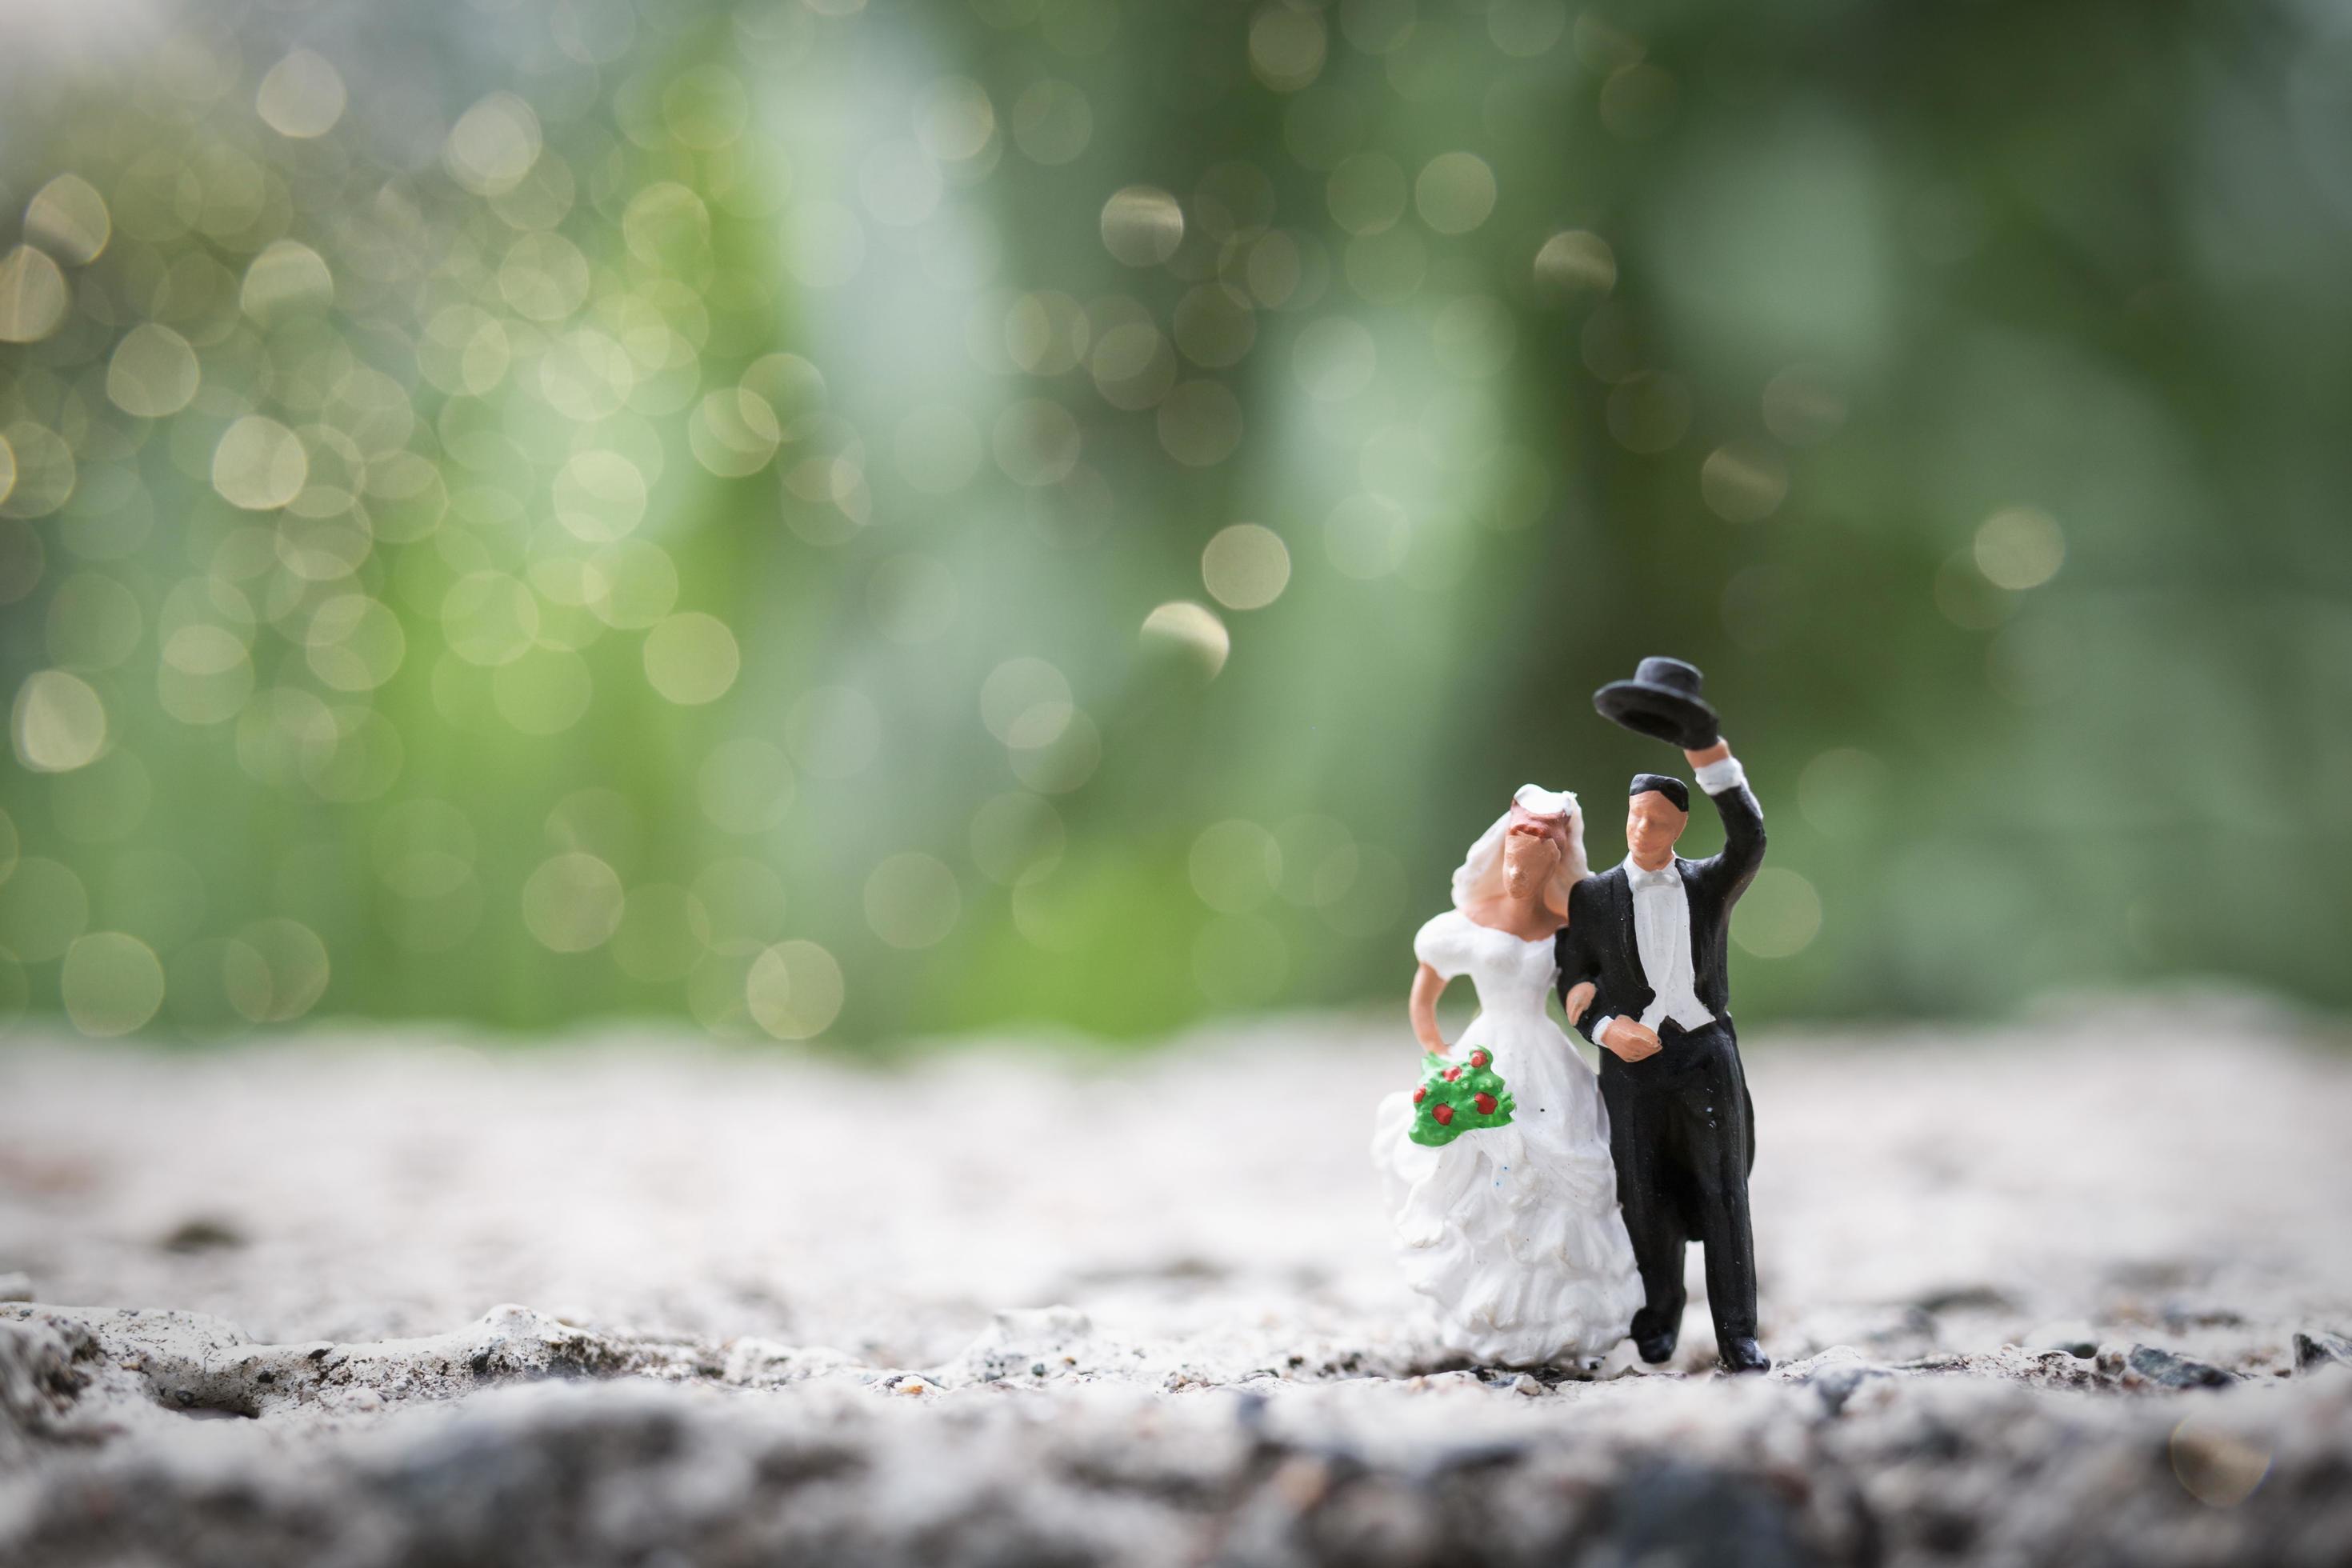 Miniature bride and groom standing outdoors with a blurry nature background  2148957 Stock Photo at Vecteezy